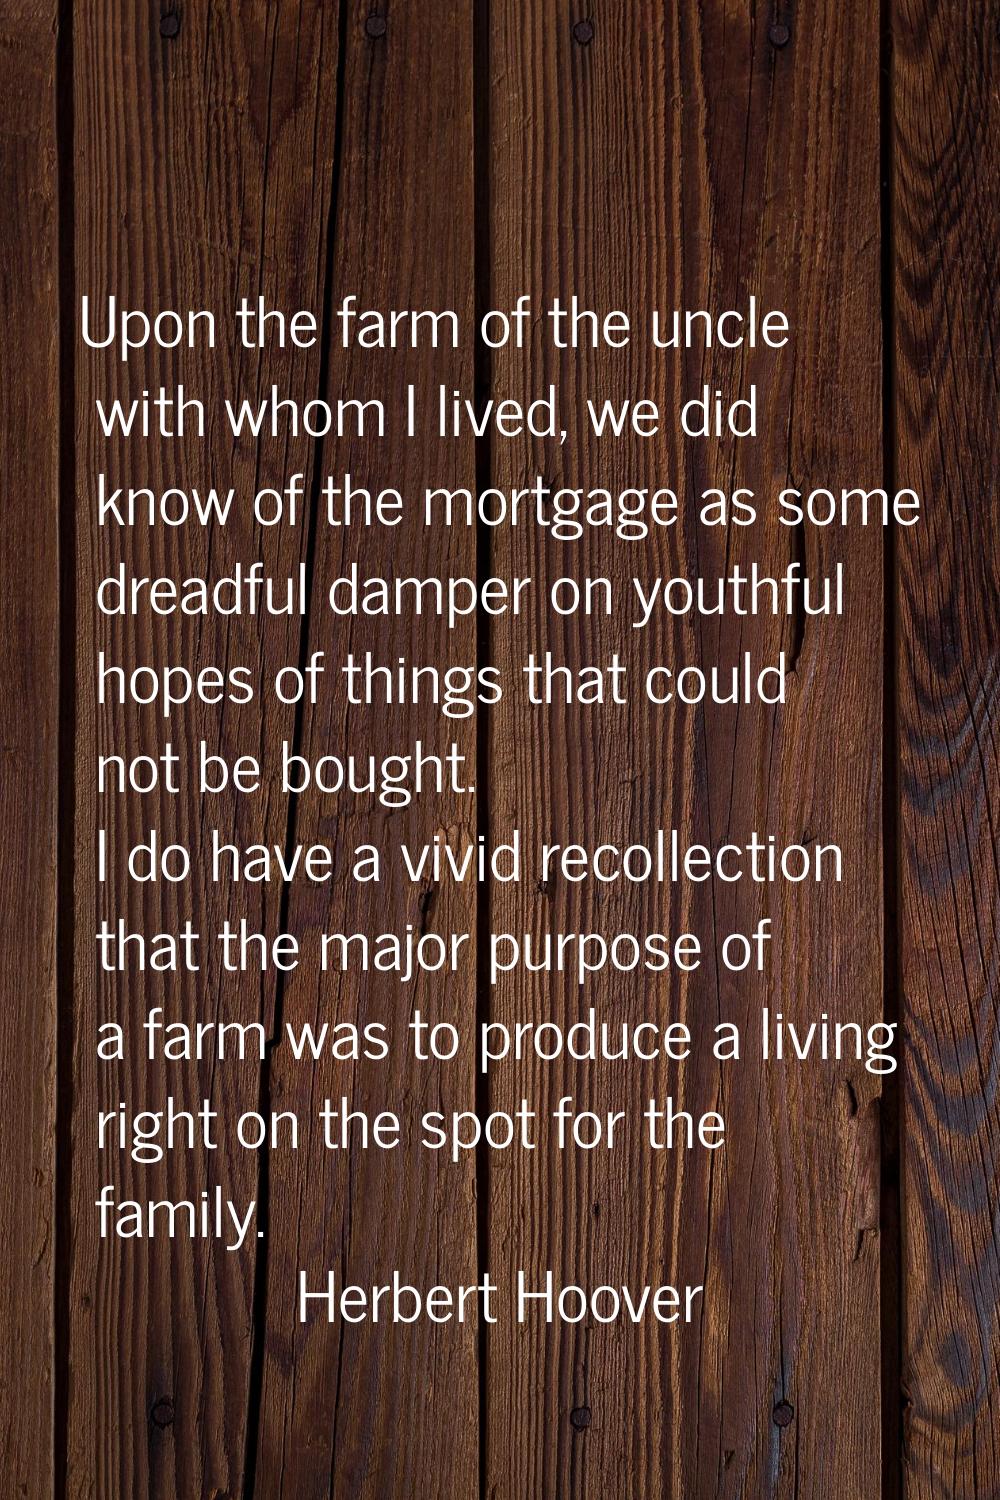 Upon the farm of the uncle with whom I lived, we did know of the mortgage as some dreadful damper o